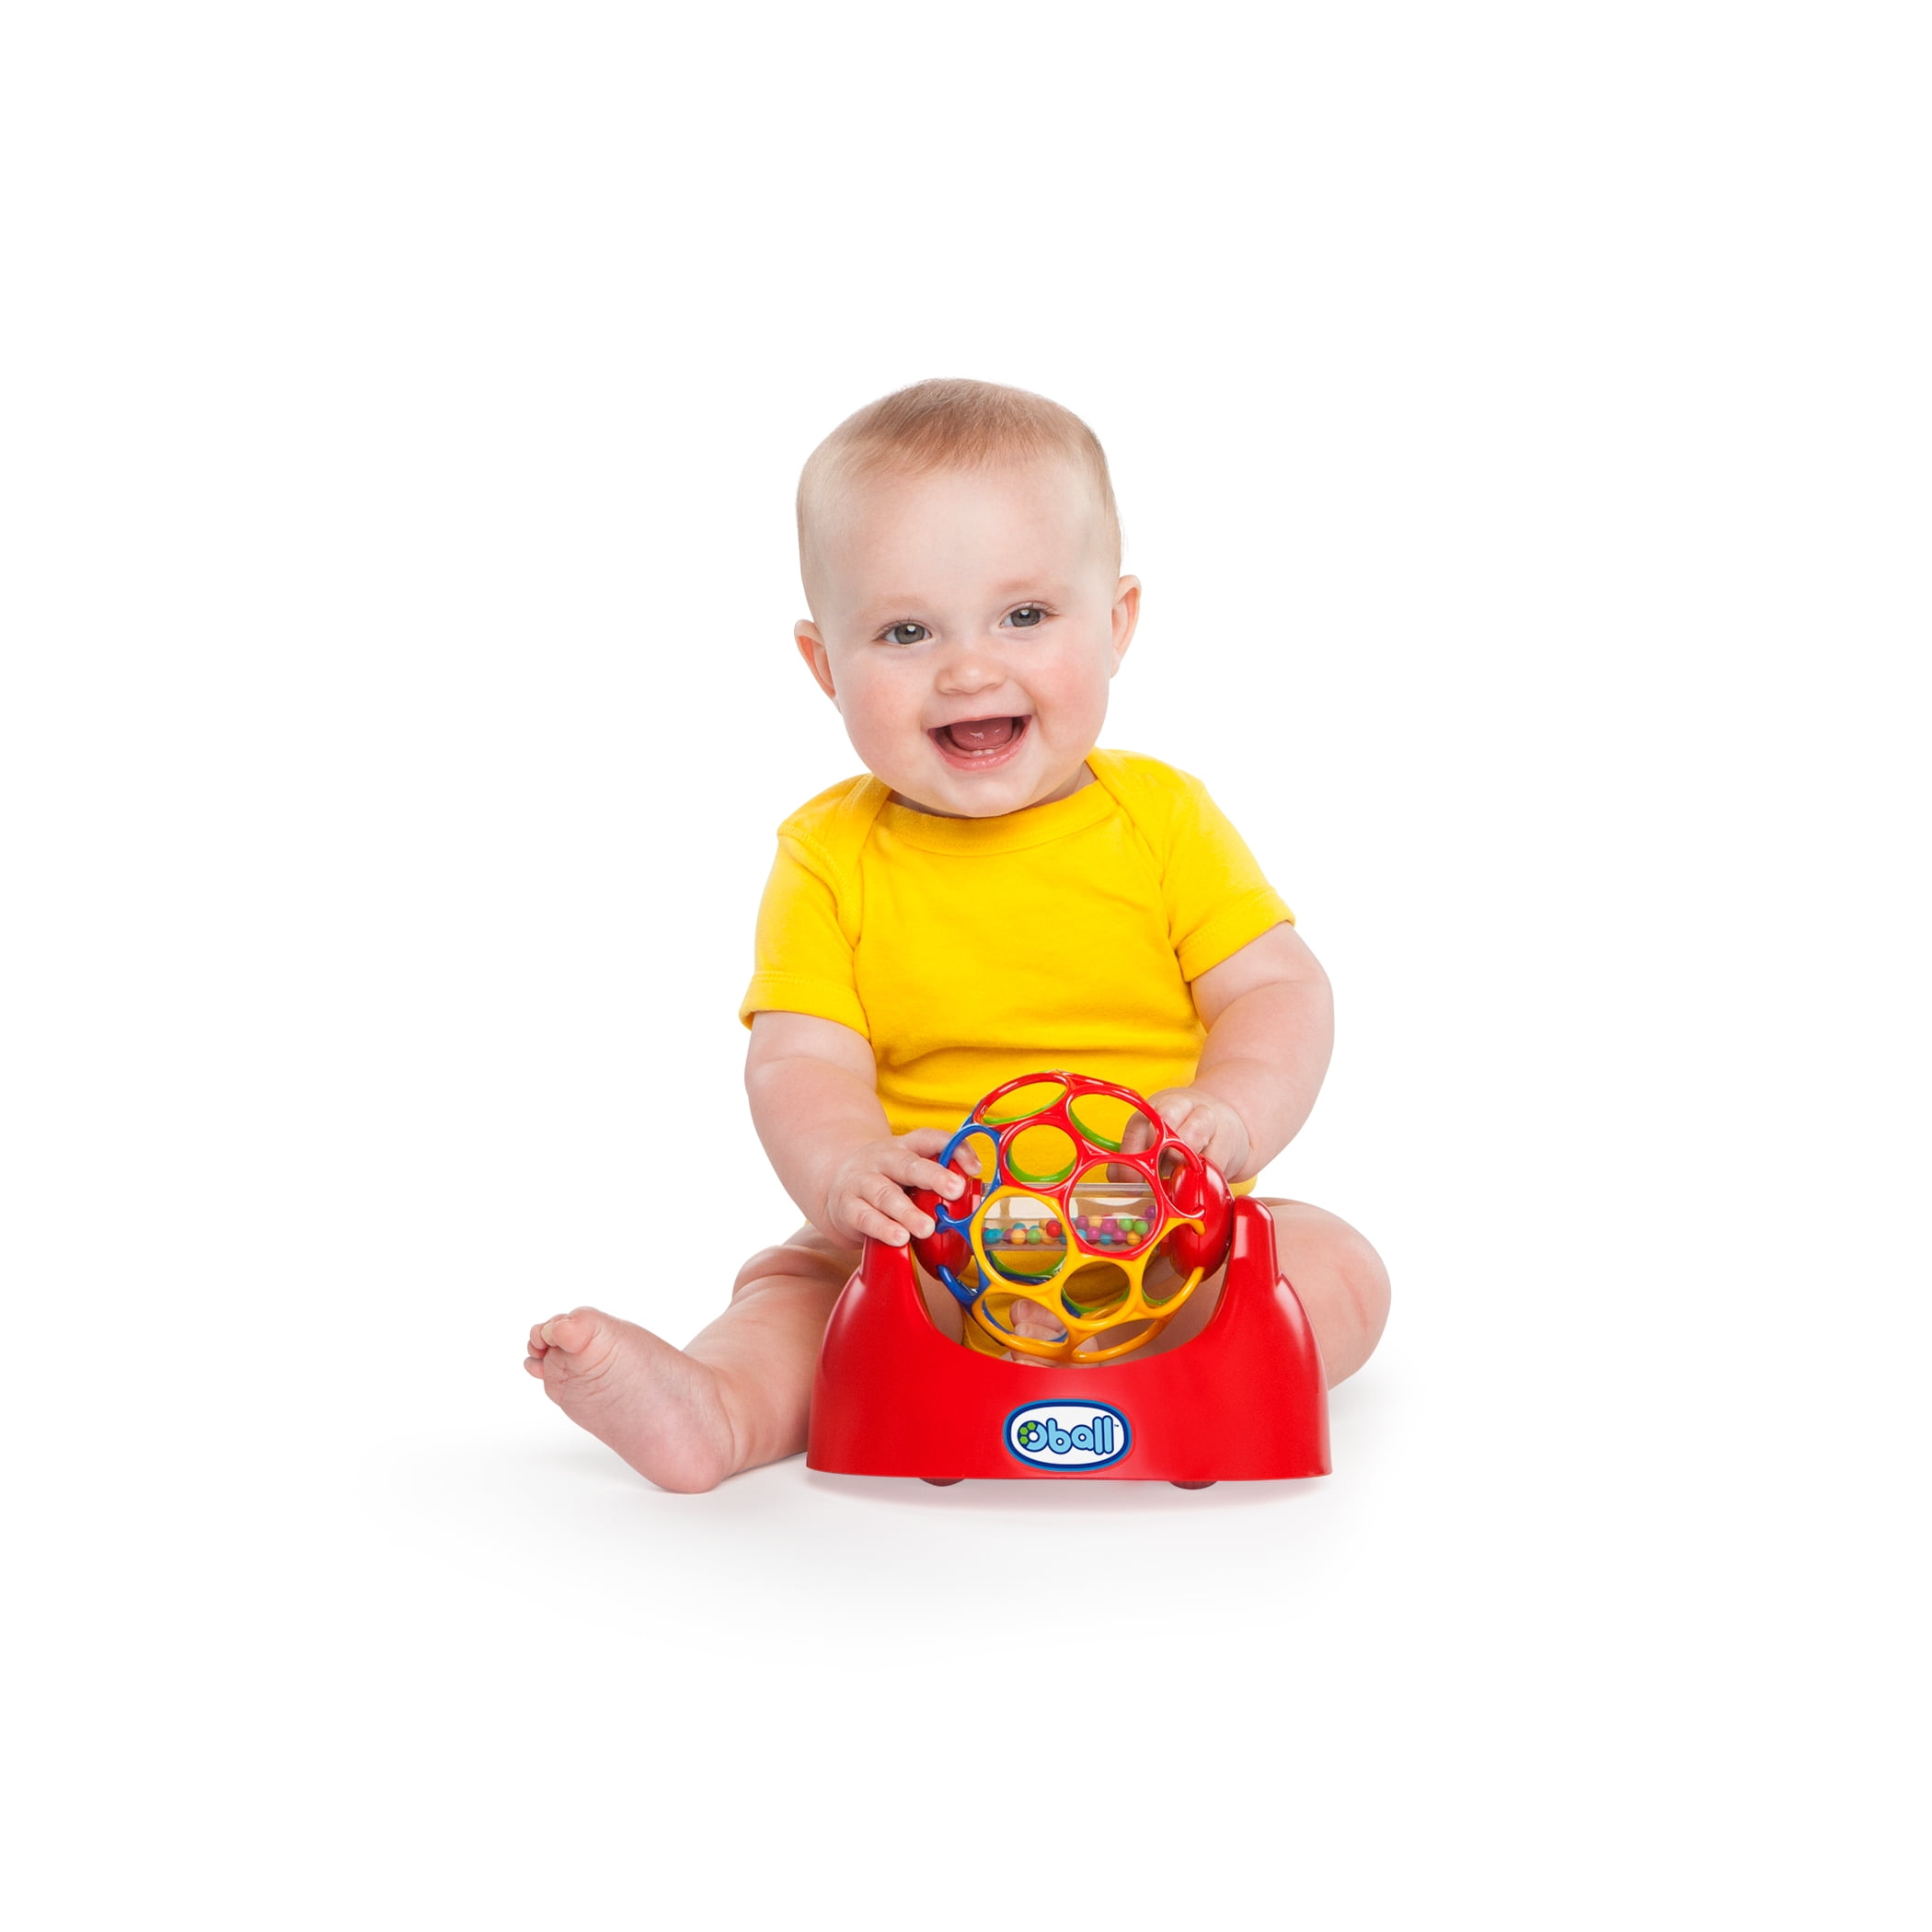 oball obounce activity center for baby